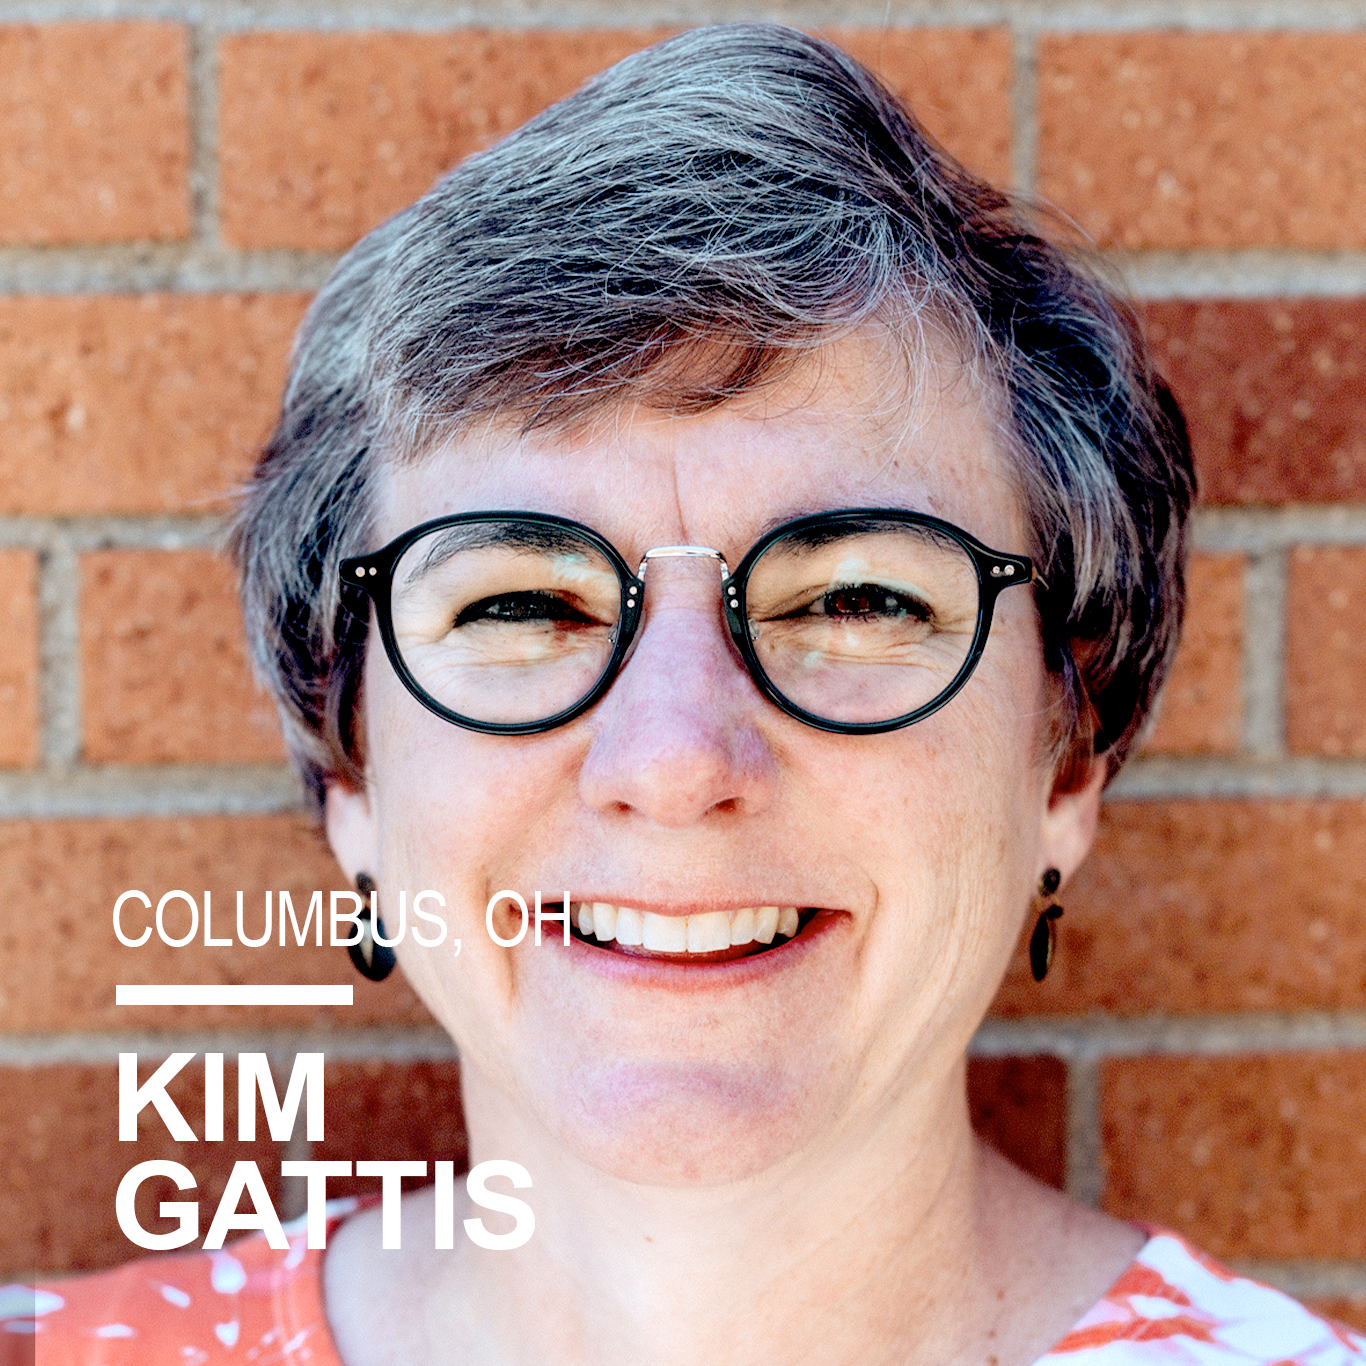 Kim Gattis teaches innovation, engineering, and architecture at St. Francis DeSales High School in Columbus, OH. She has a bachelor’s degree in Industrial Design and a master’s in Education. She won the 2019 St. Francis DeSales Teacher Excellence Award and was named a Columbus Parent magazine Teacher of the Year Finalist in 2020. Kim loves the freedom and opportunities her program affords the St. Francis DeSales students. For her, the best thing about teaching is watching students discover something new about themselves and their abilities.